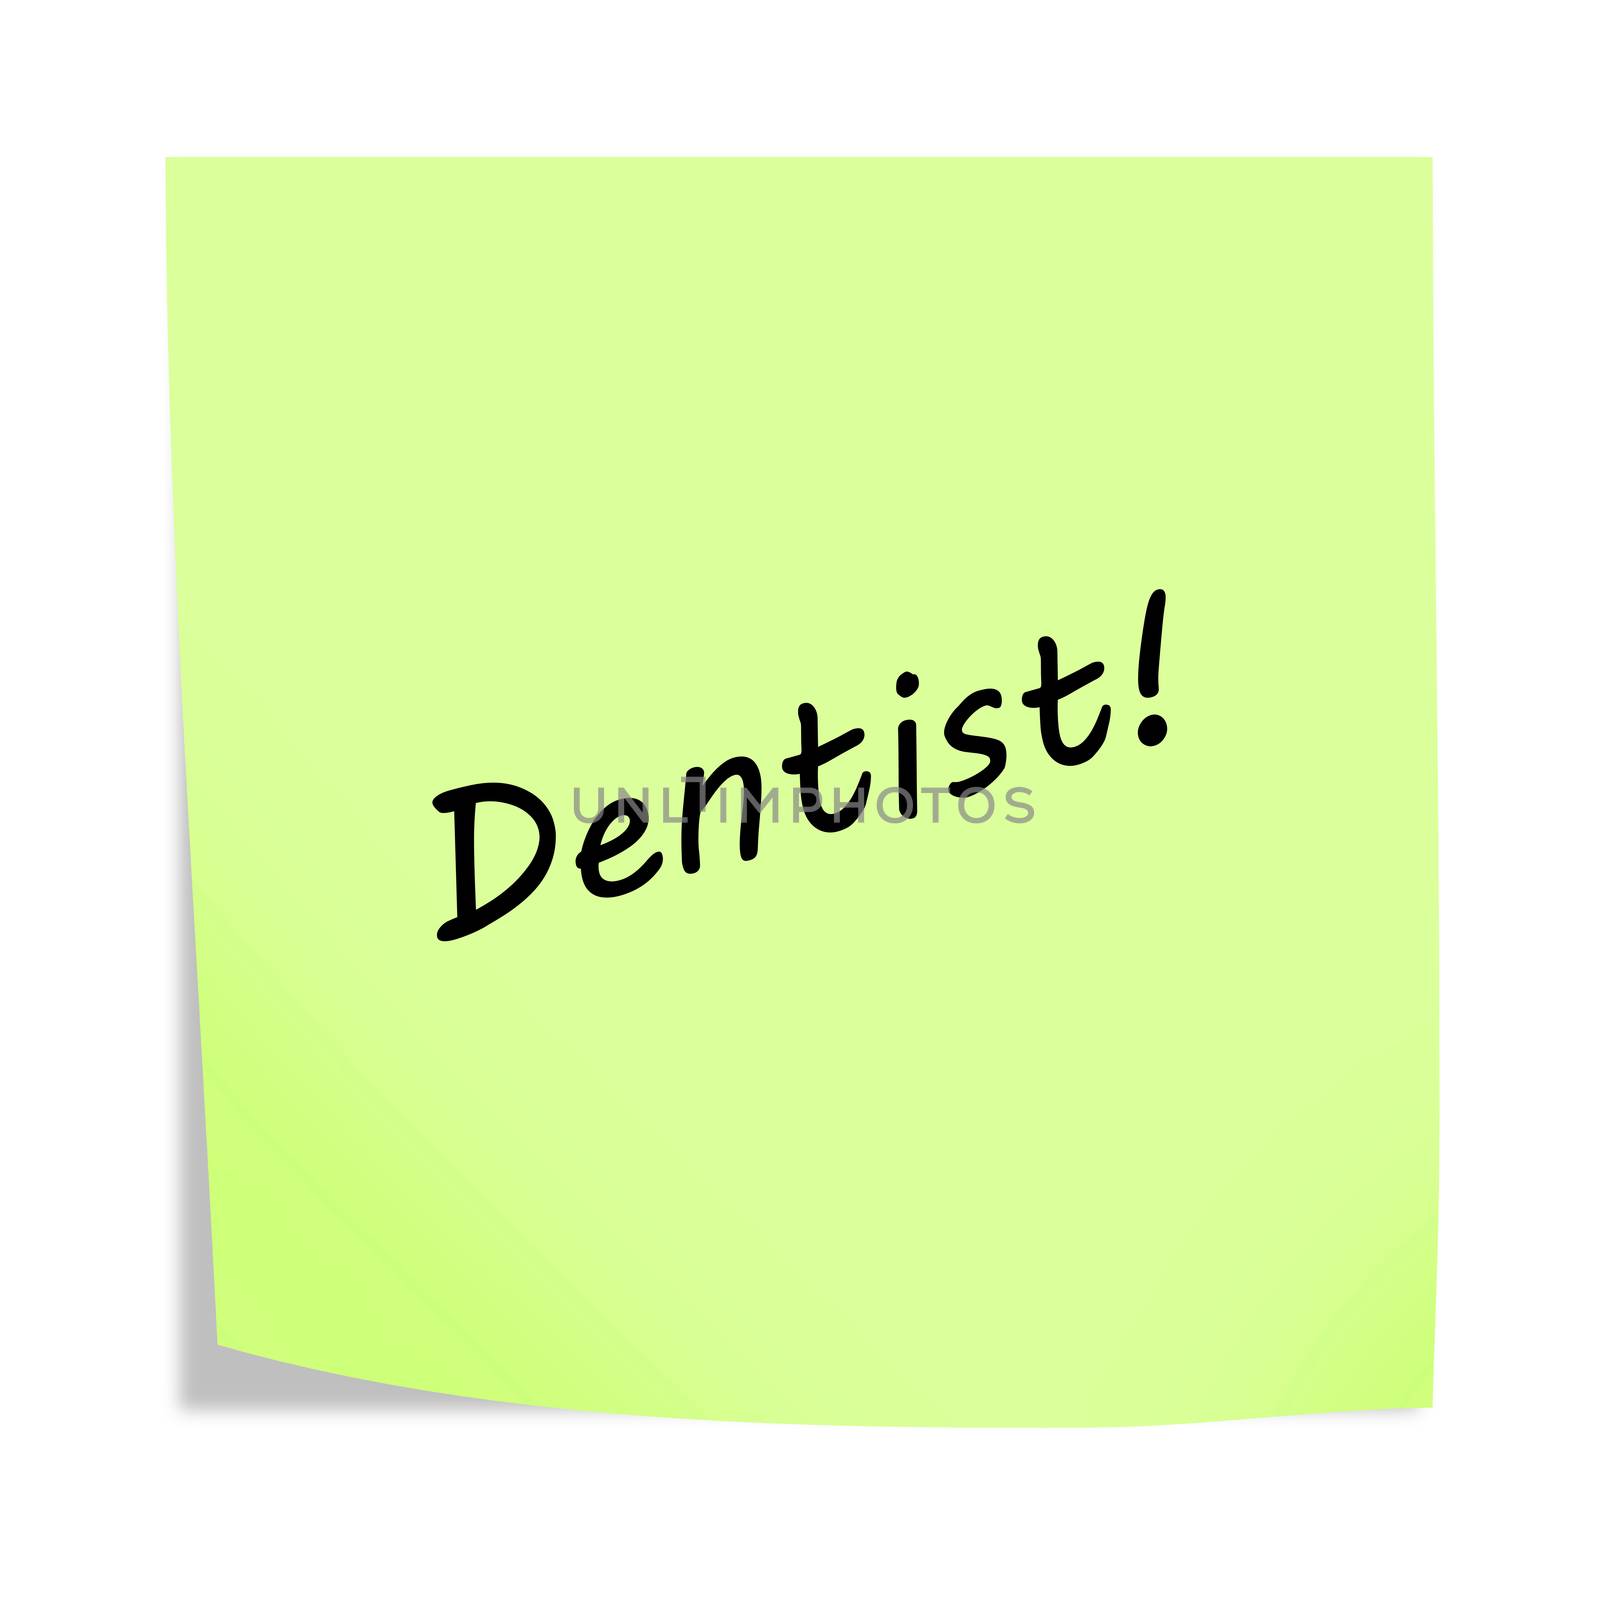 A Dentist reminder post note isolated on white with clipping path